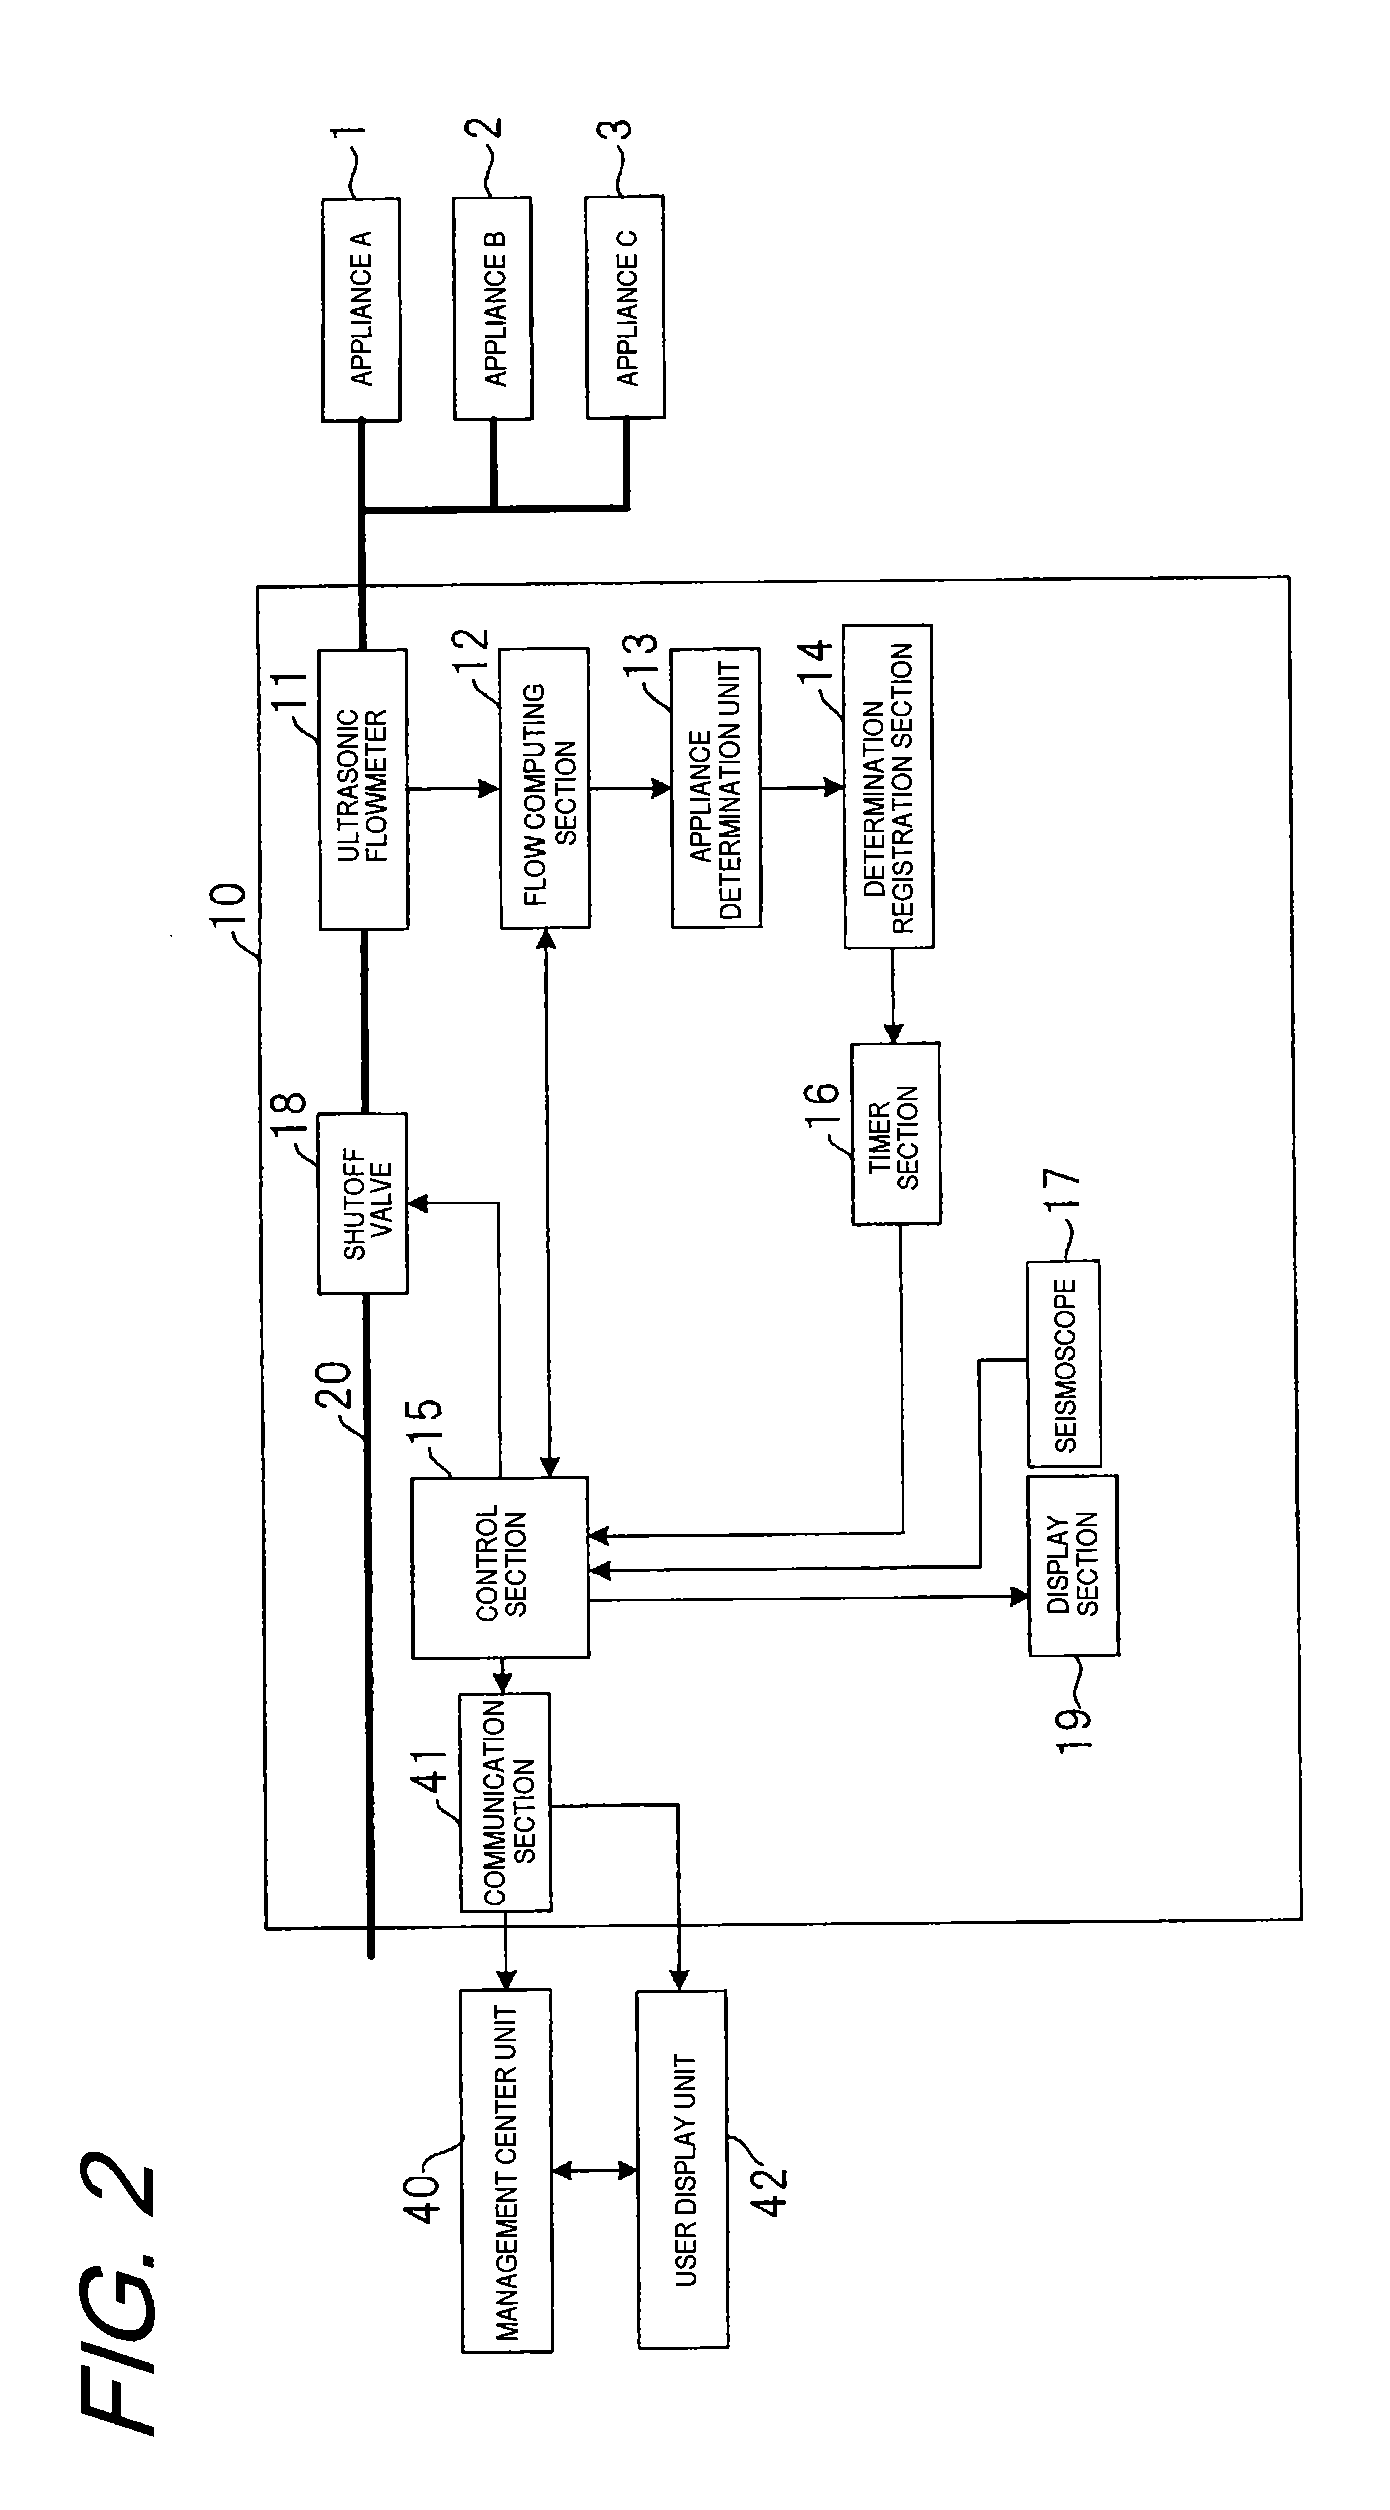 Appliance management system and gas supply system